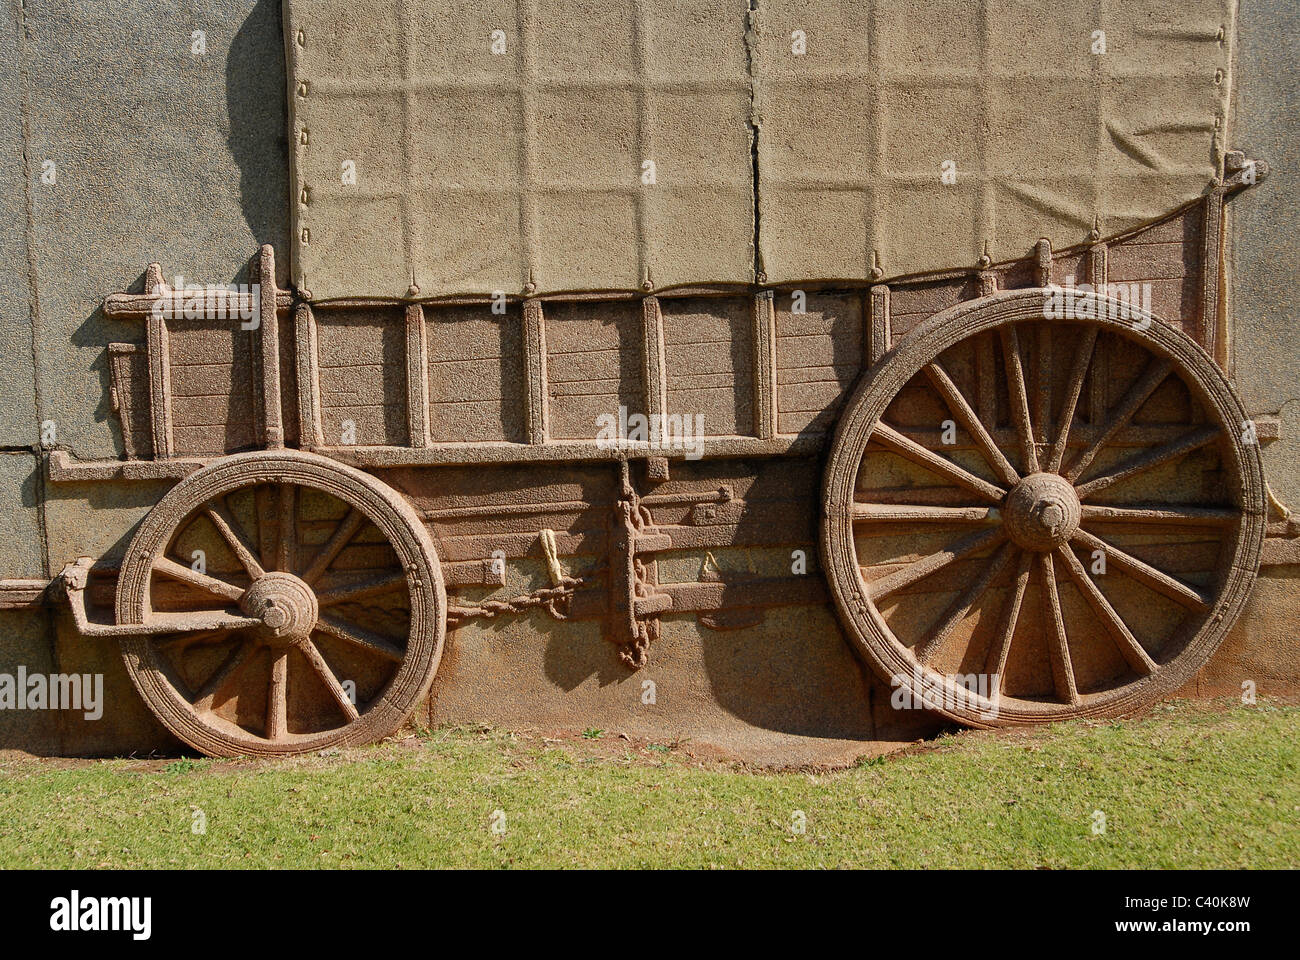 Carvings of wagon  at the Voortrekker Monument in Pretoria, South Africa. Stock Photo